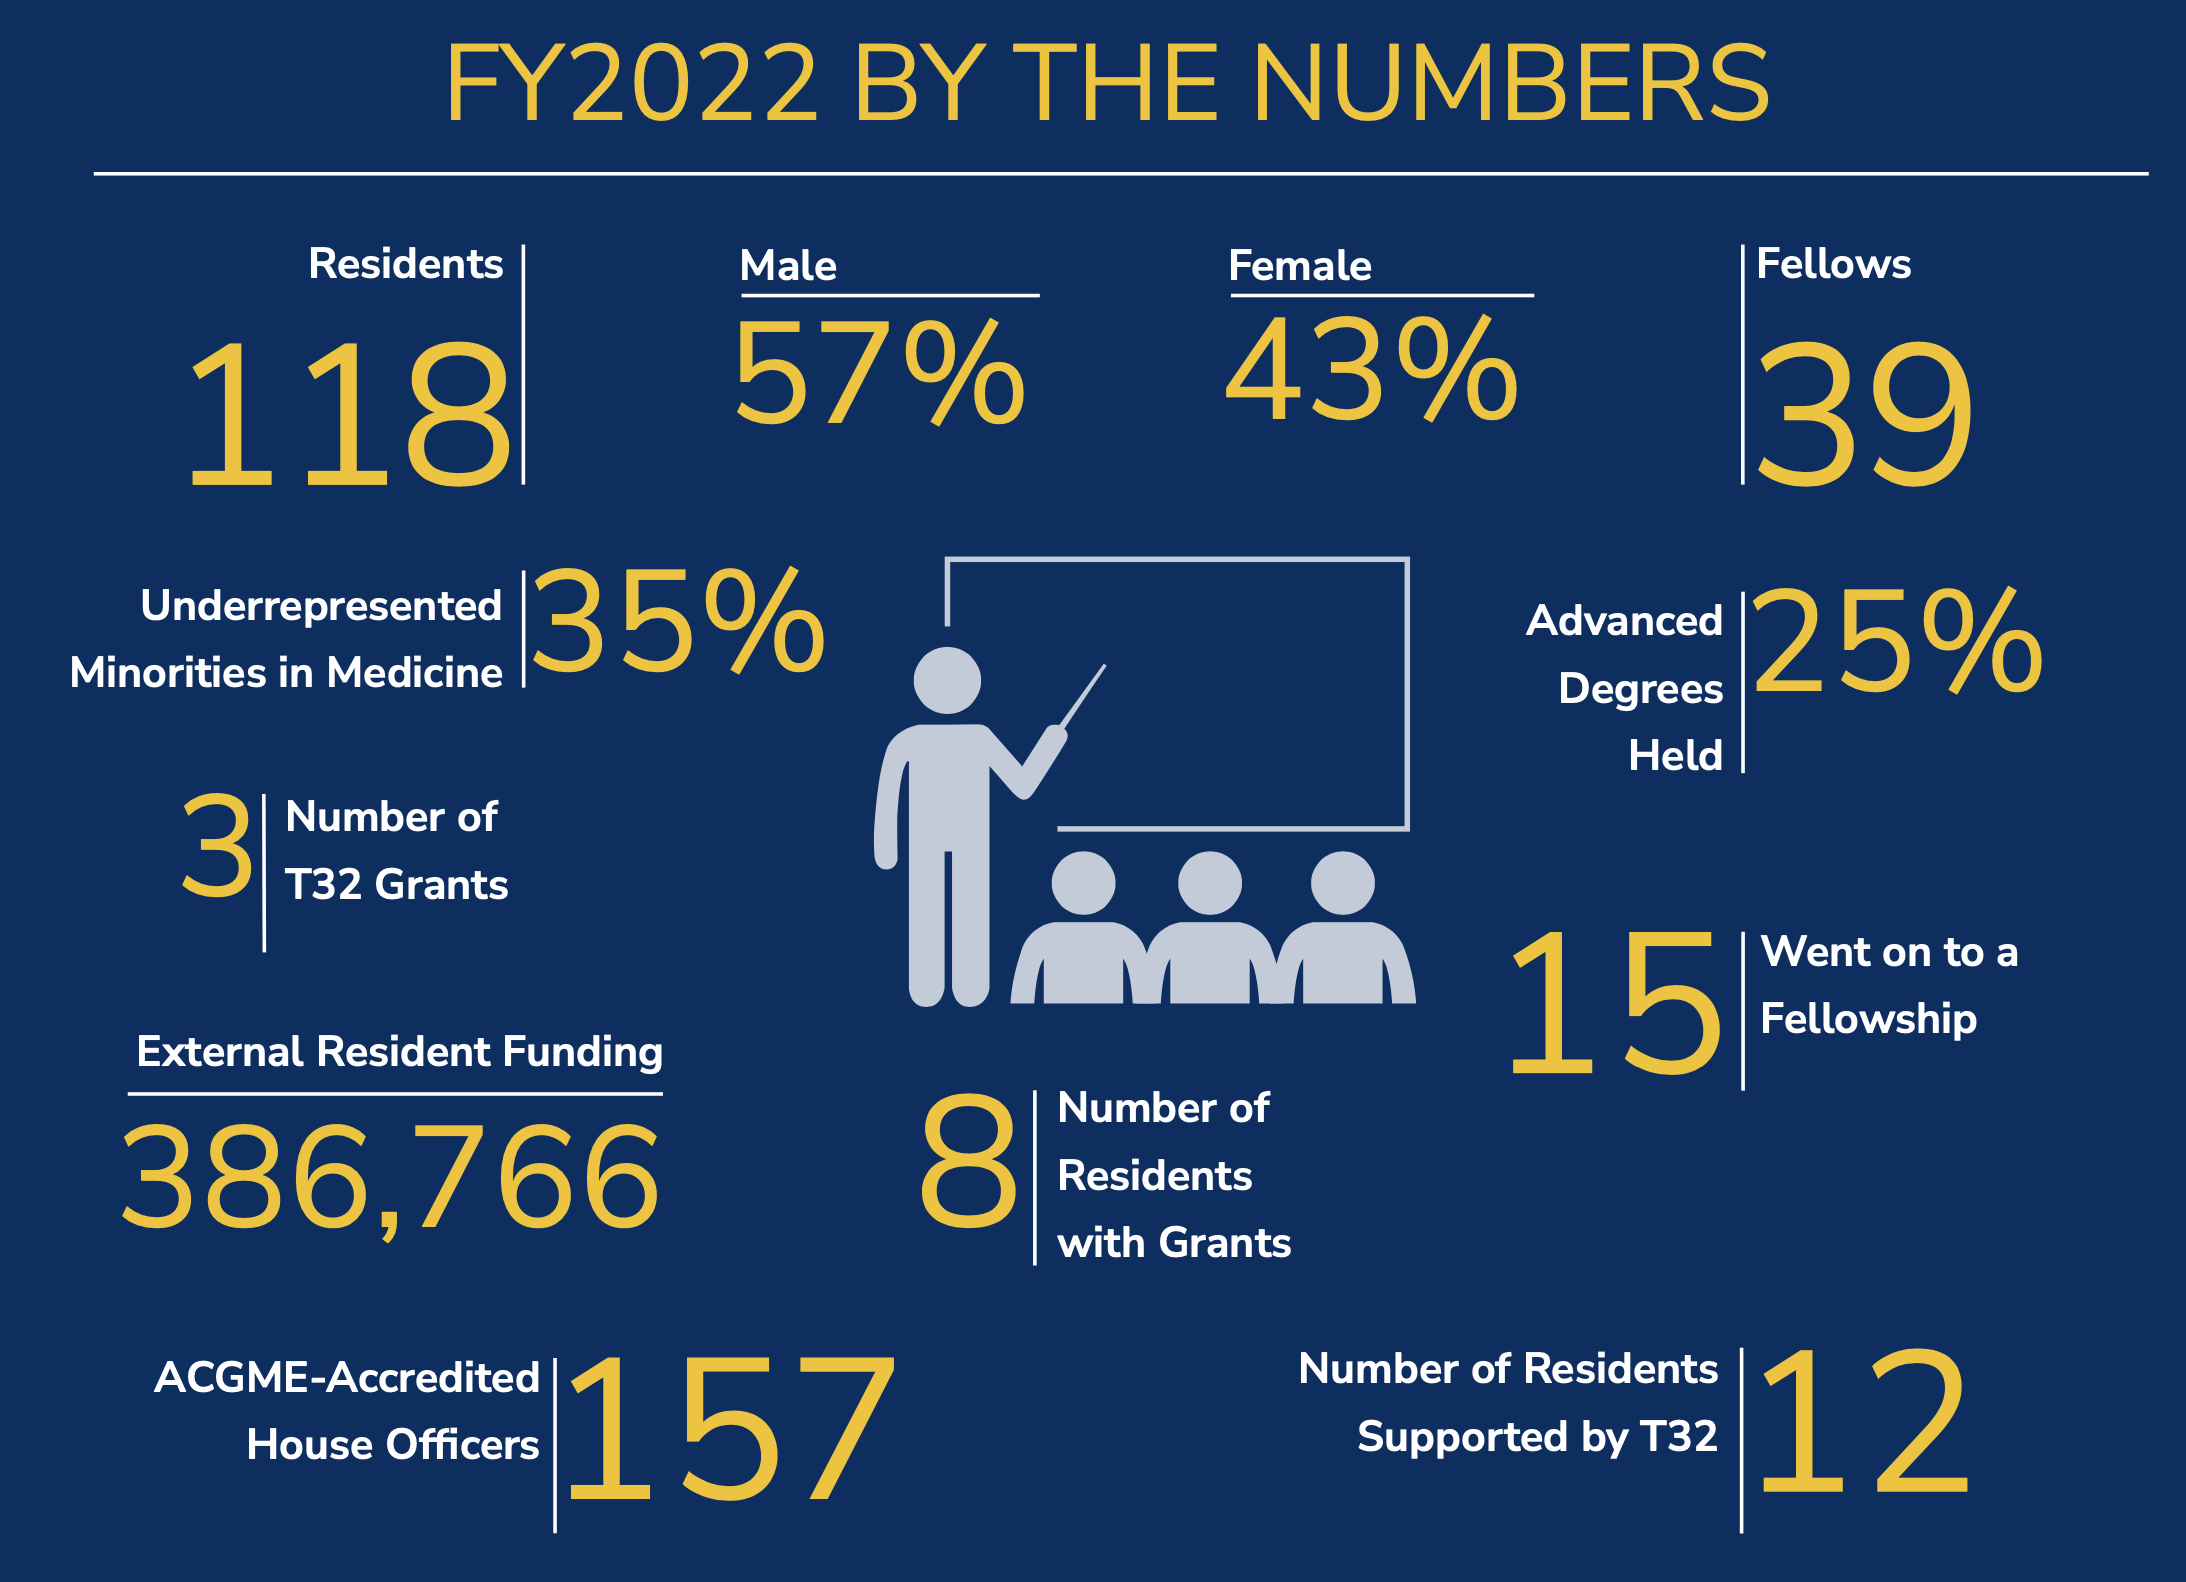 Department of Surgery Fiscal Year 2022 Education By the Numbers